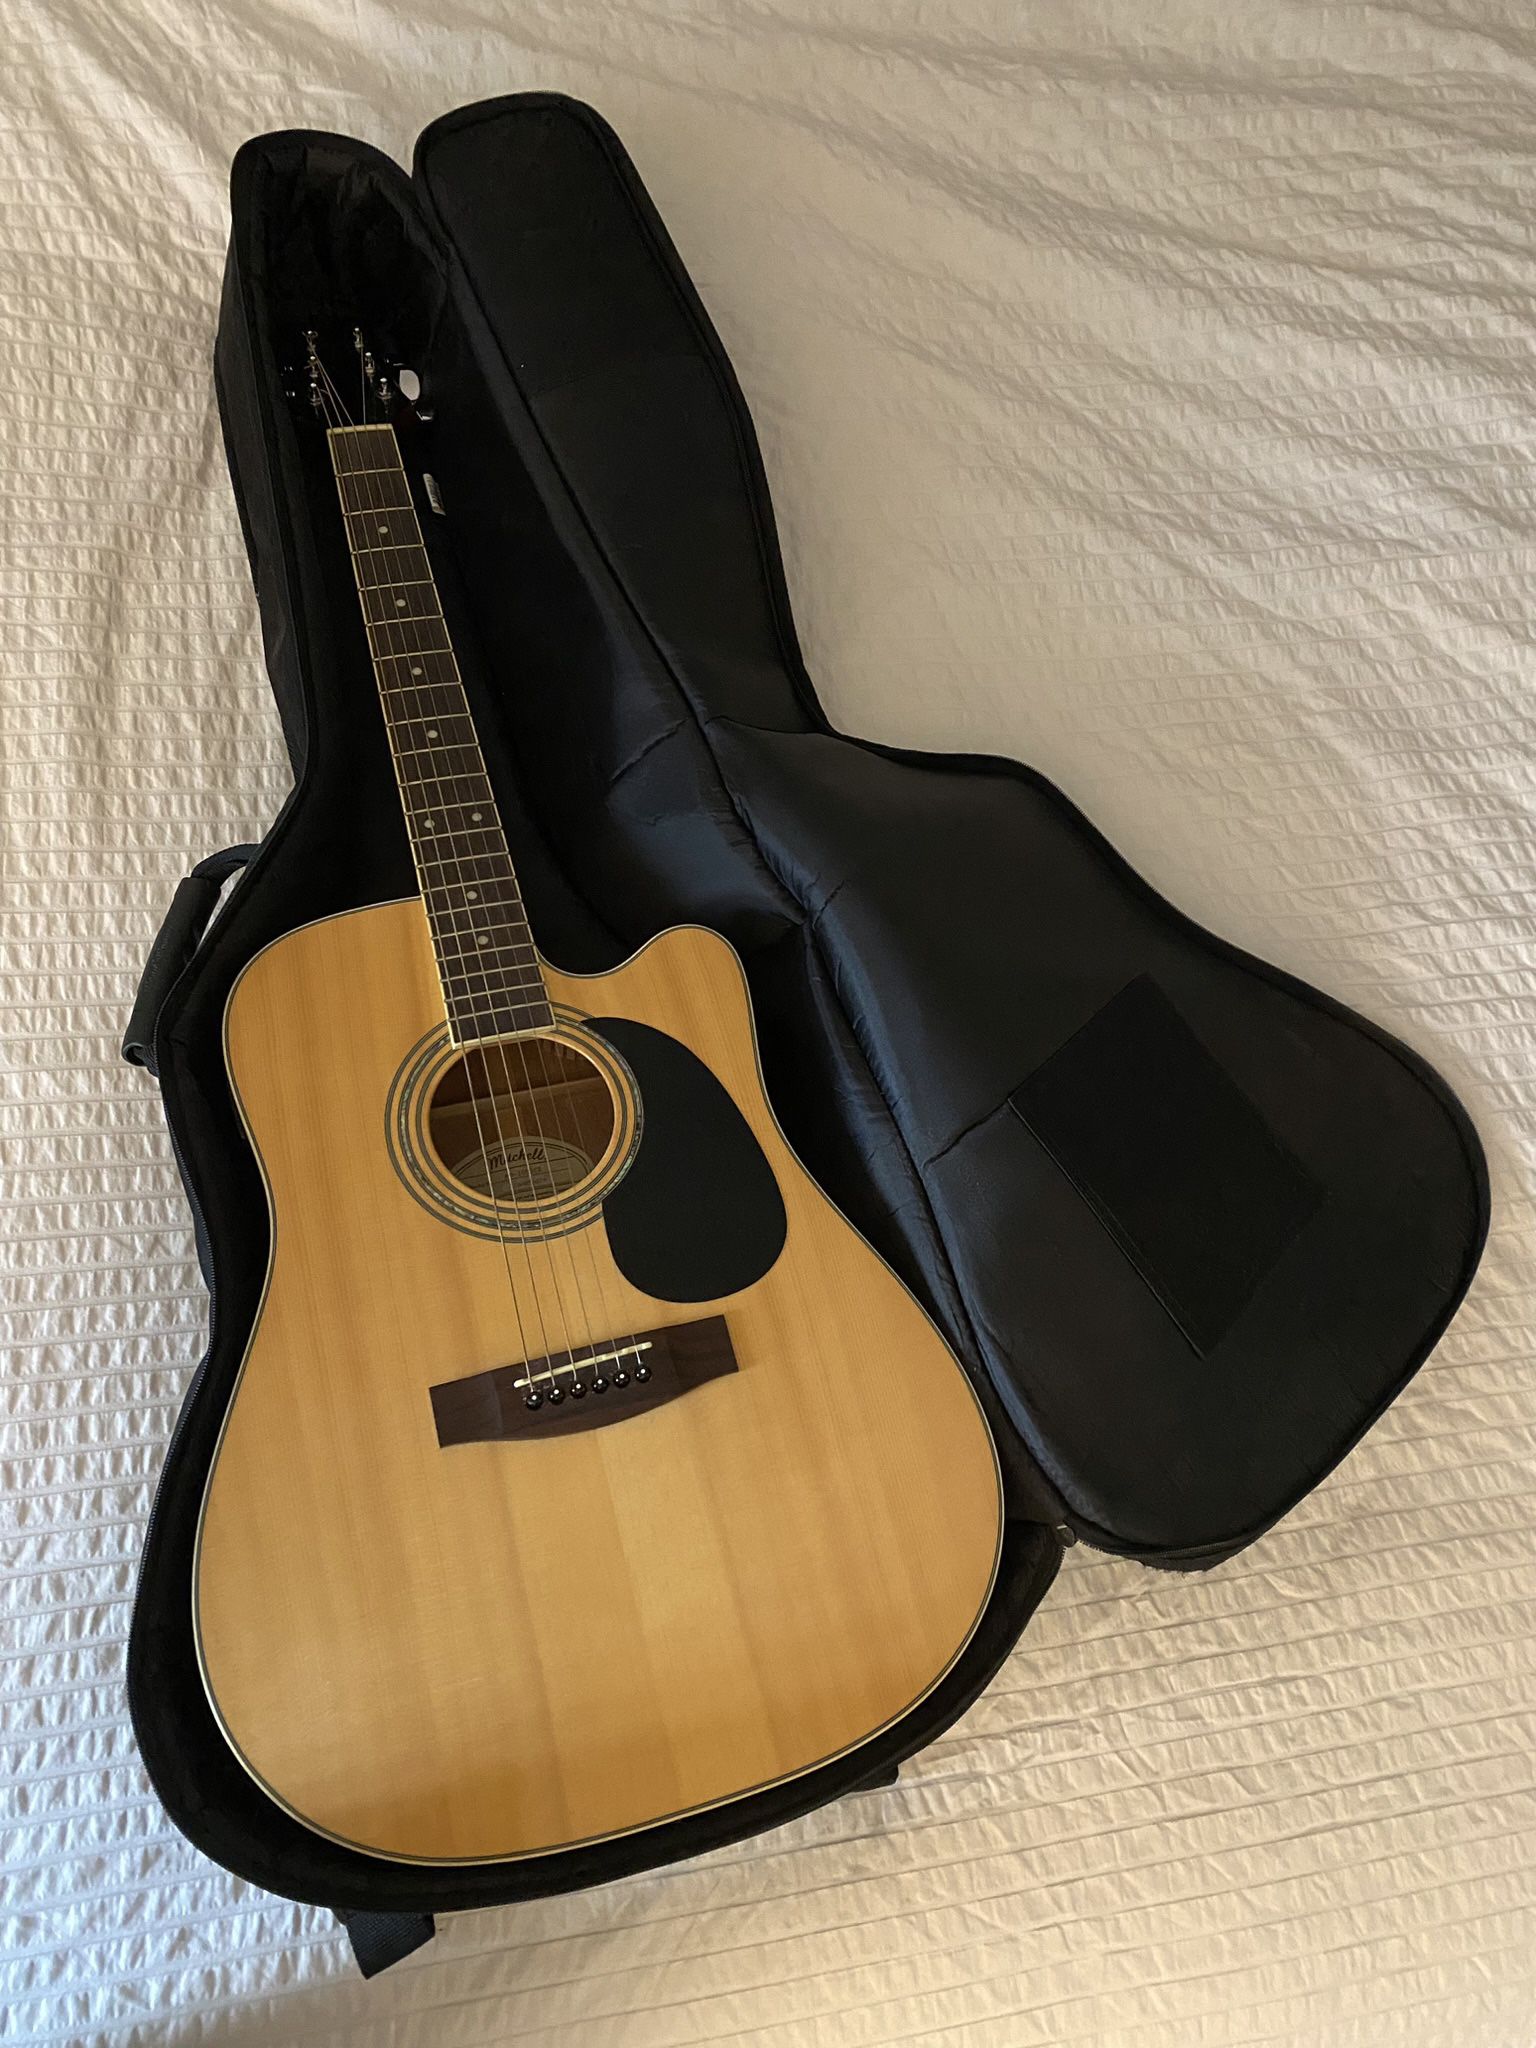 Mitchell MD-100SCE and Travel Bag - Like New!